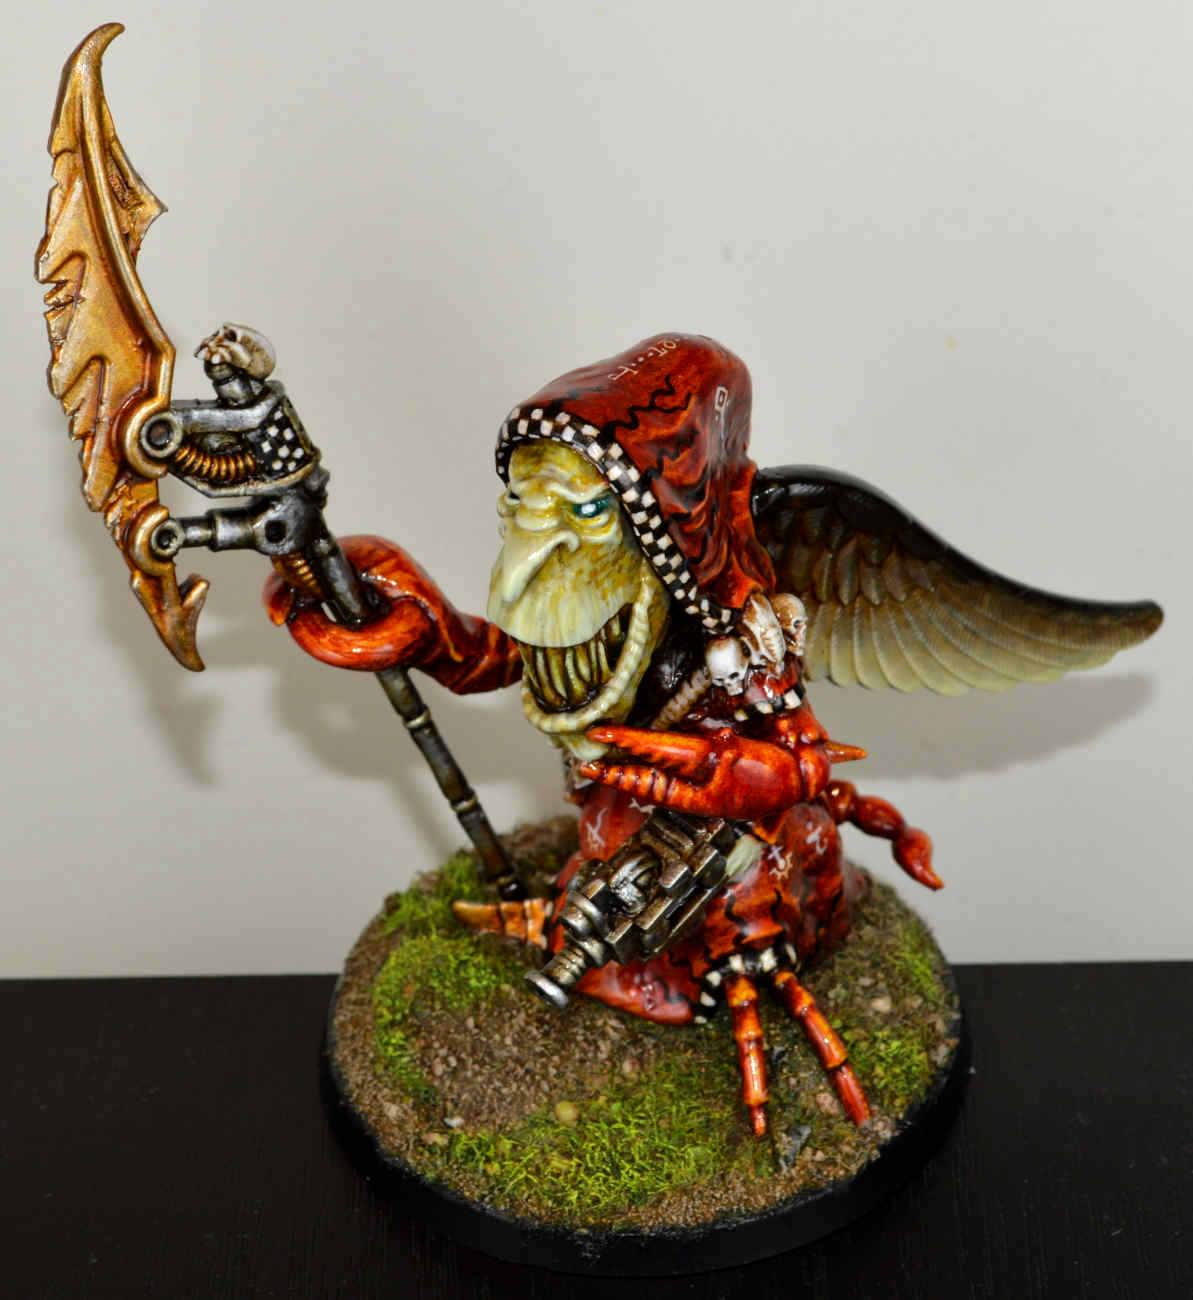 Angel, Chaos, Chaos Space Marines, Character, Conversion, Daemon Prince, Do-it-yourself, Dp, Lord, Monster, Overlords, Scratch Build, Warhammer 40,000